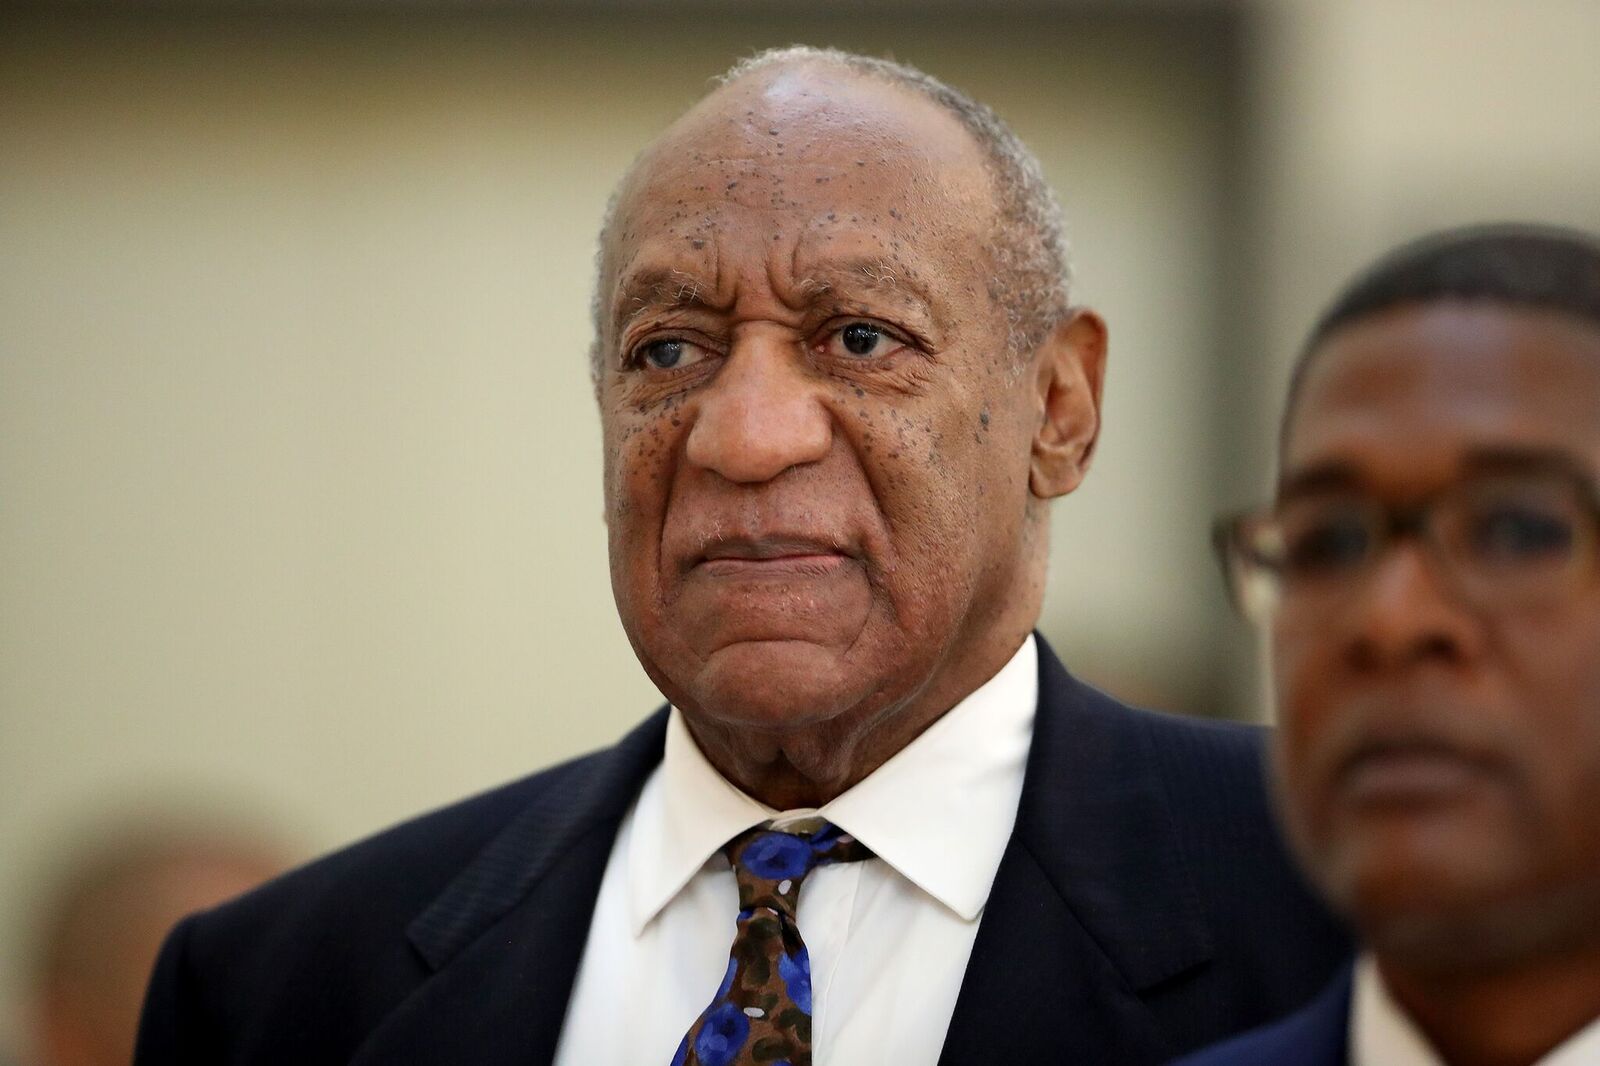 Bill Cosby during his trial sentencing in September 2018. | Source: Getty Images